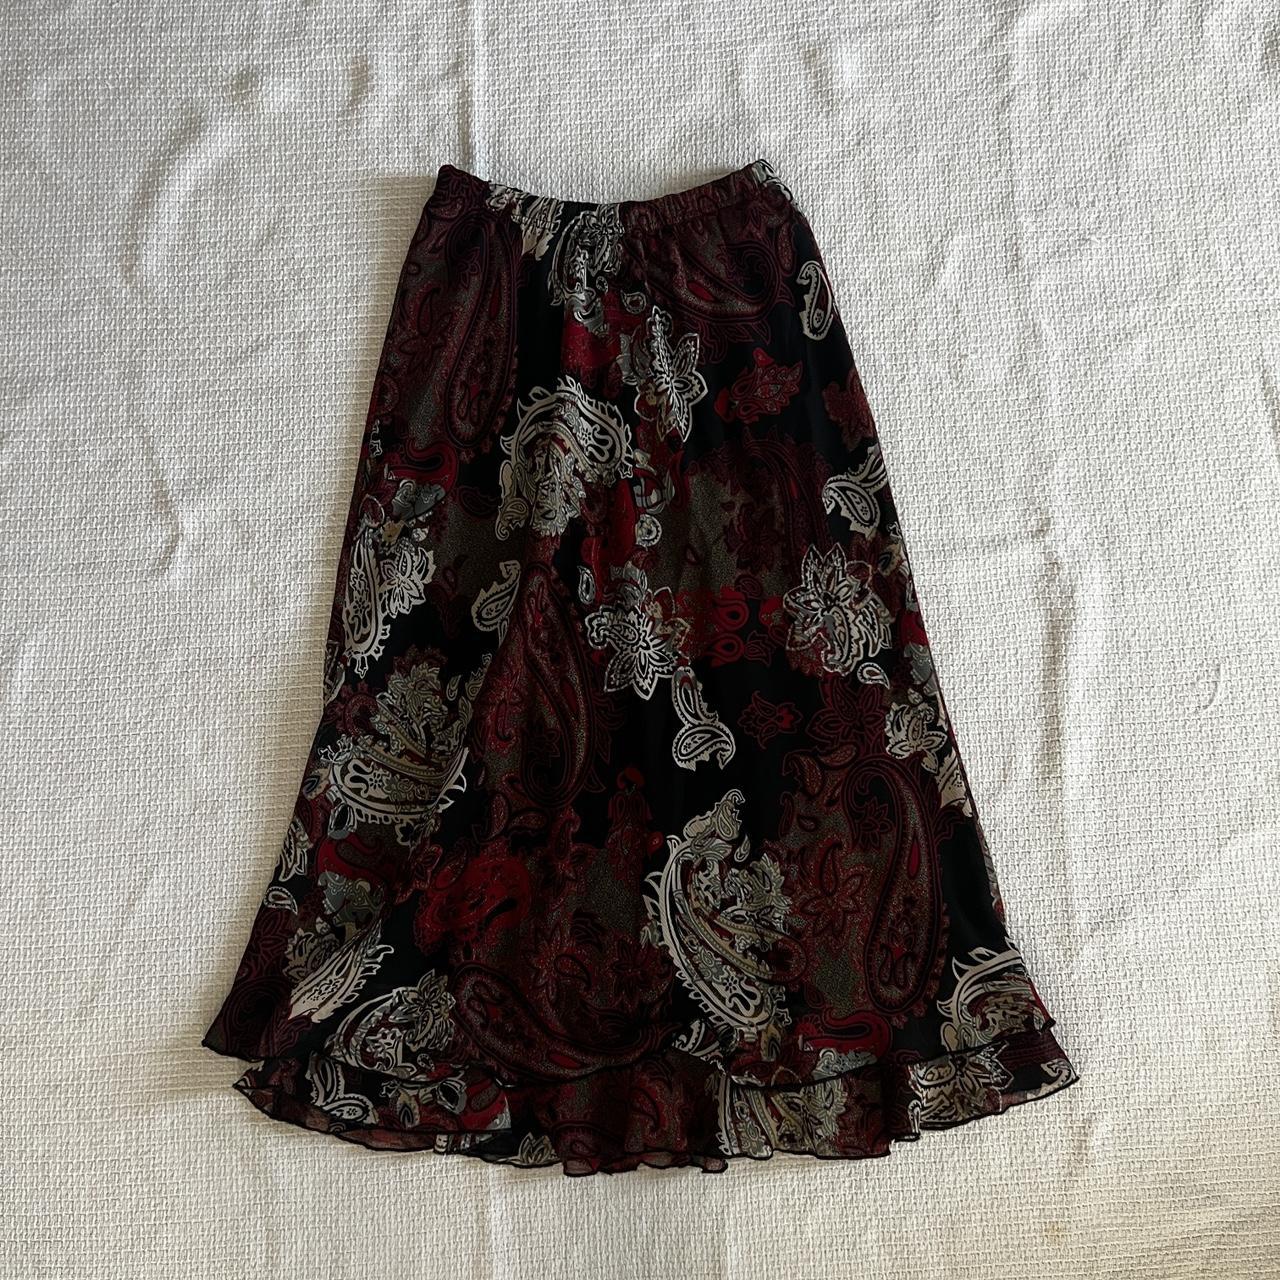 American Vintage Women's Black and Red Skirt